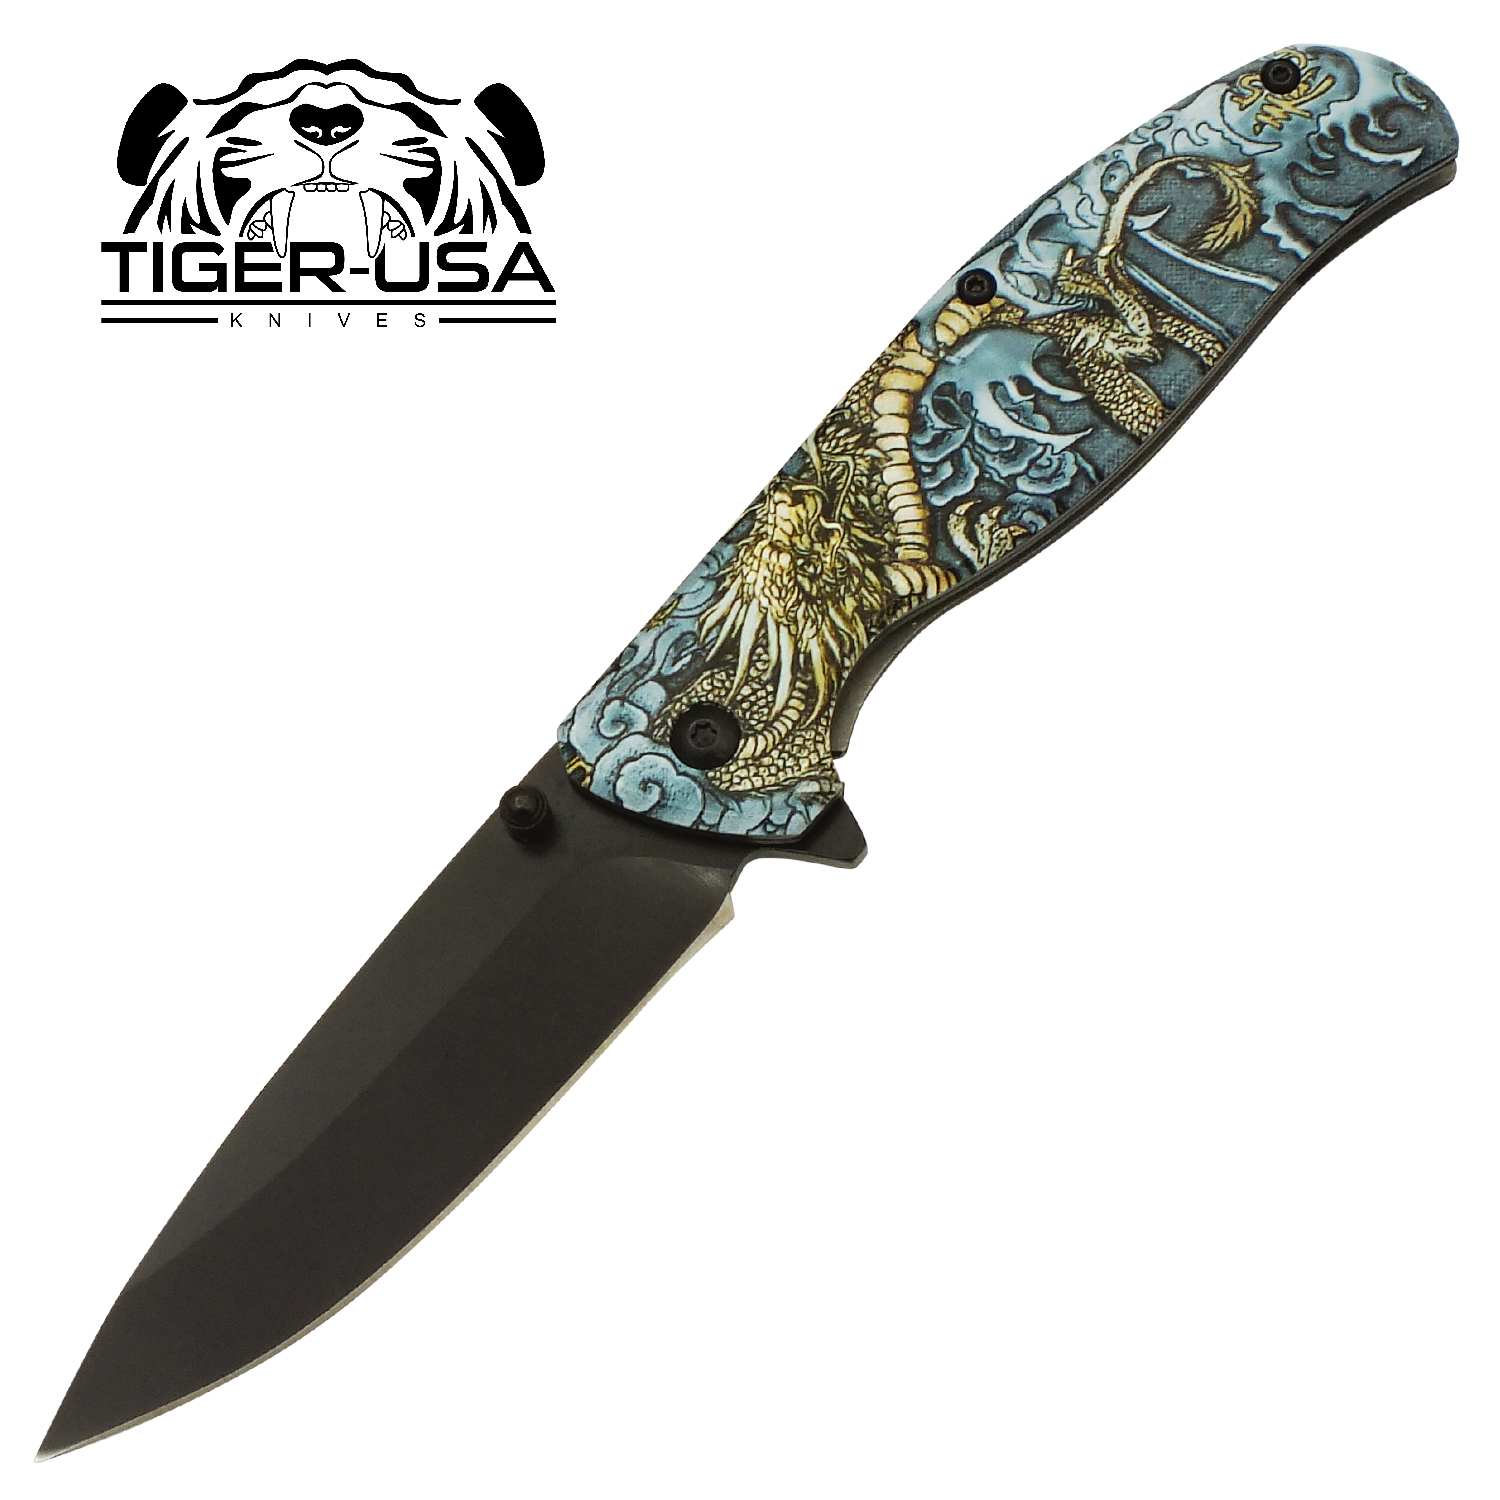 Storm Dragon's Wrath Spring Assisted Folding Knife